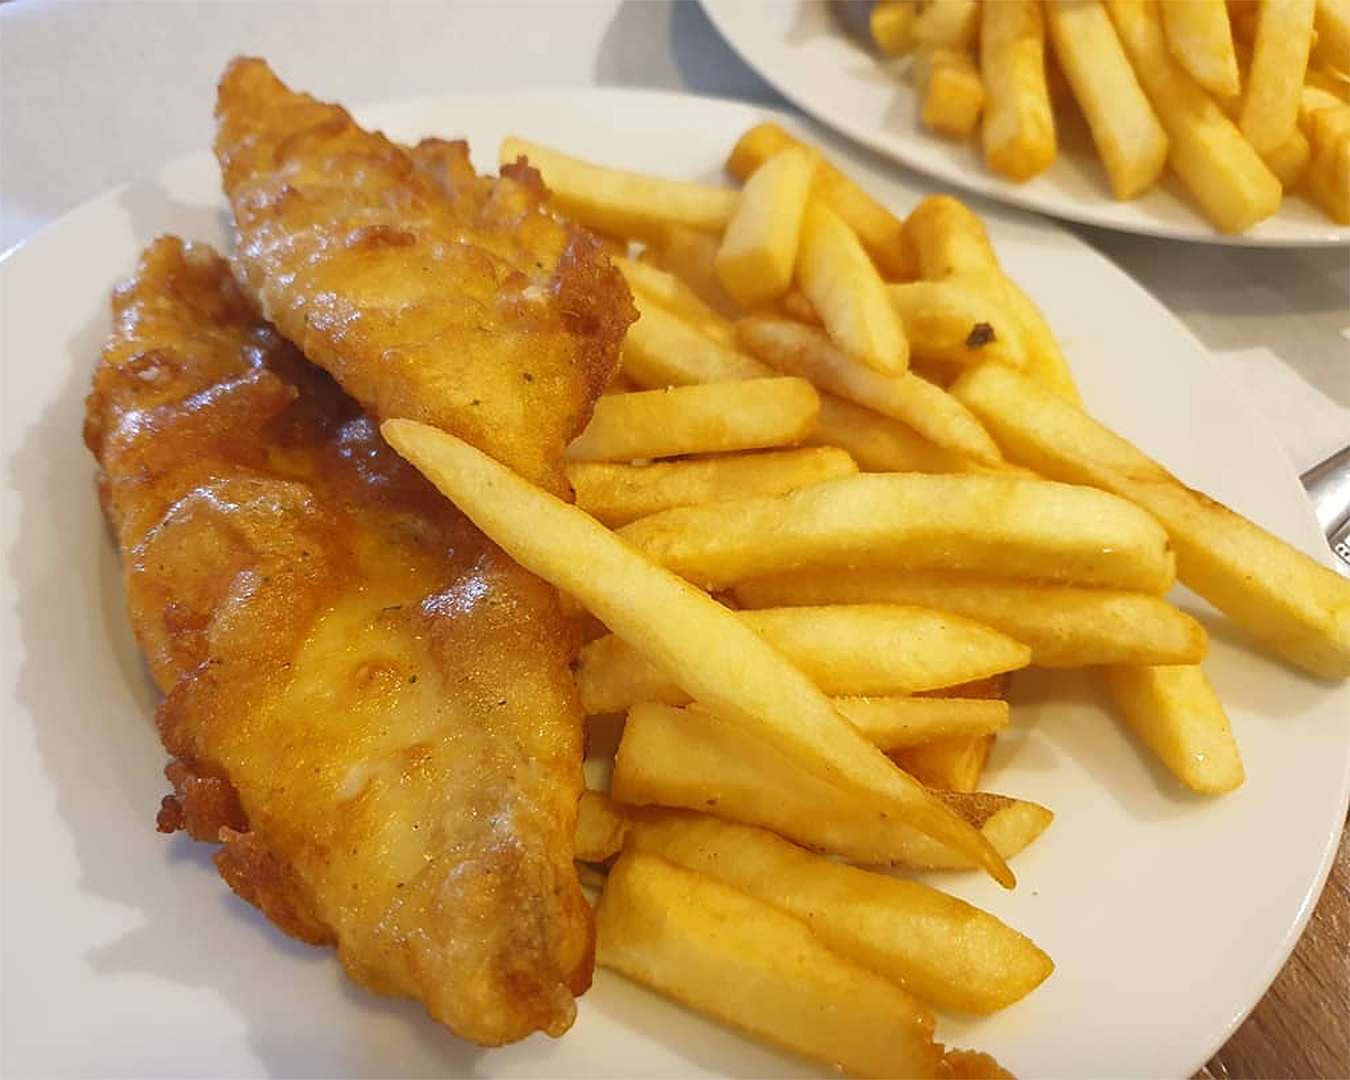 Fresh fish and chips from Mag's